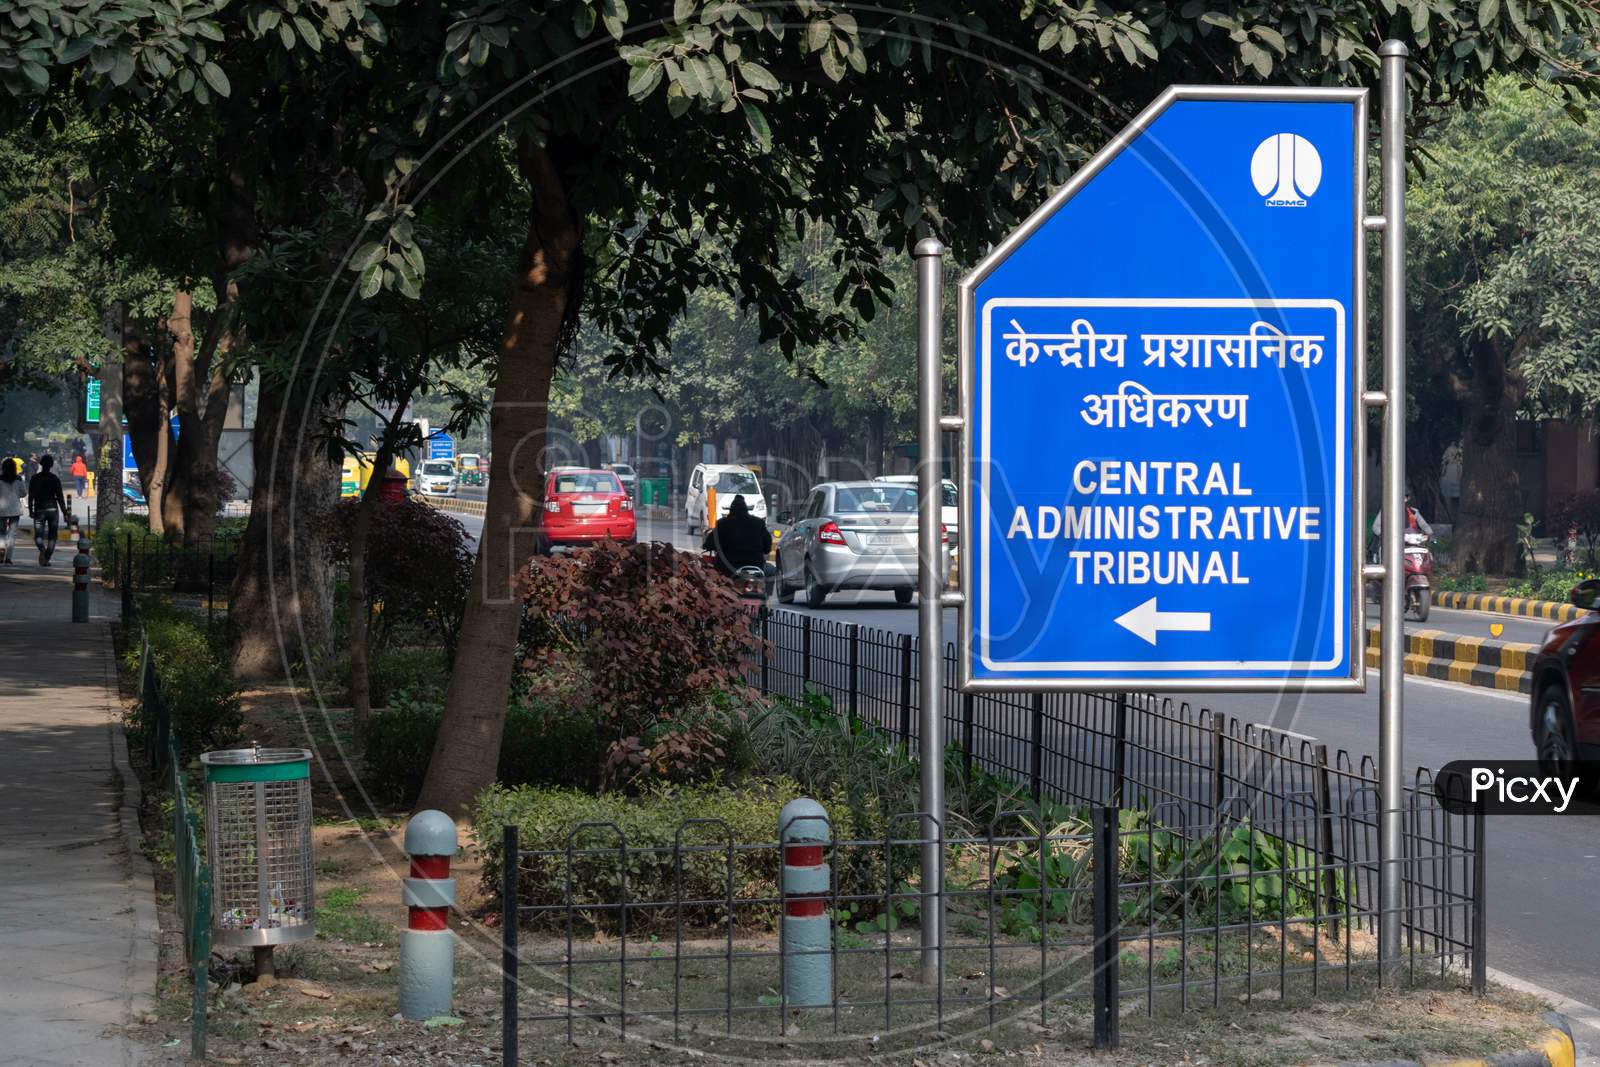 Sign board for Central Administrative Tribunal